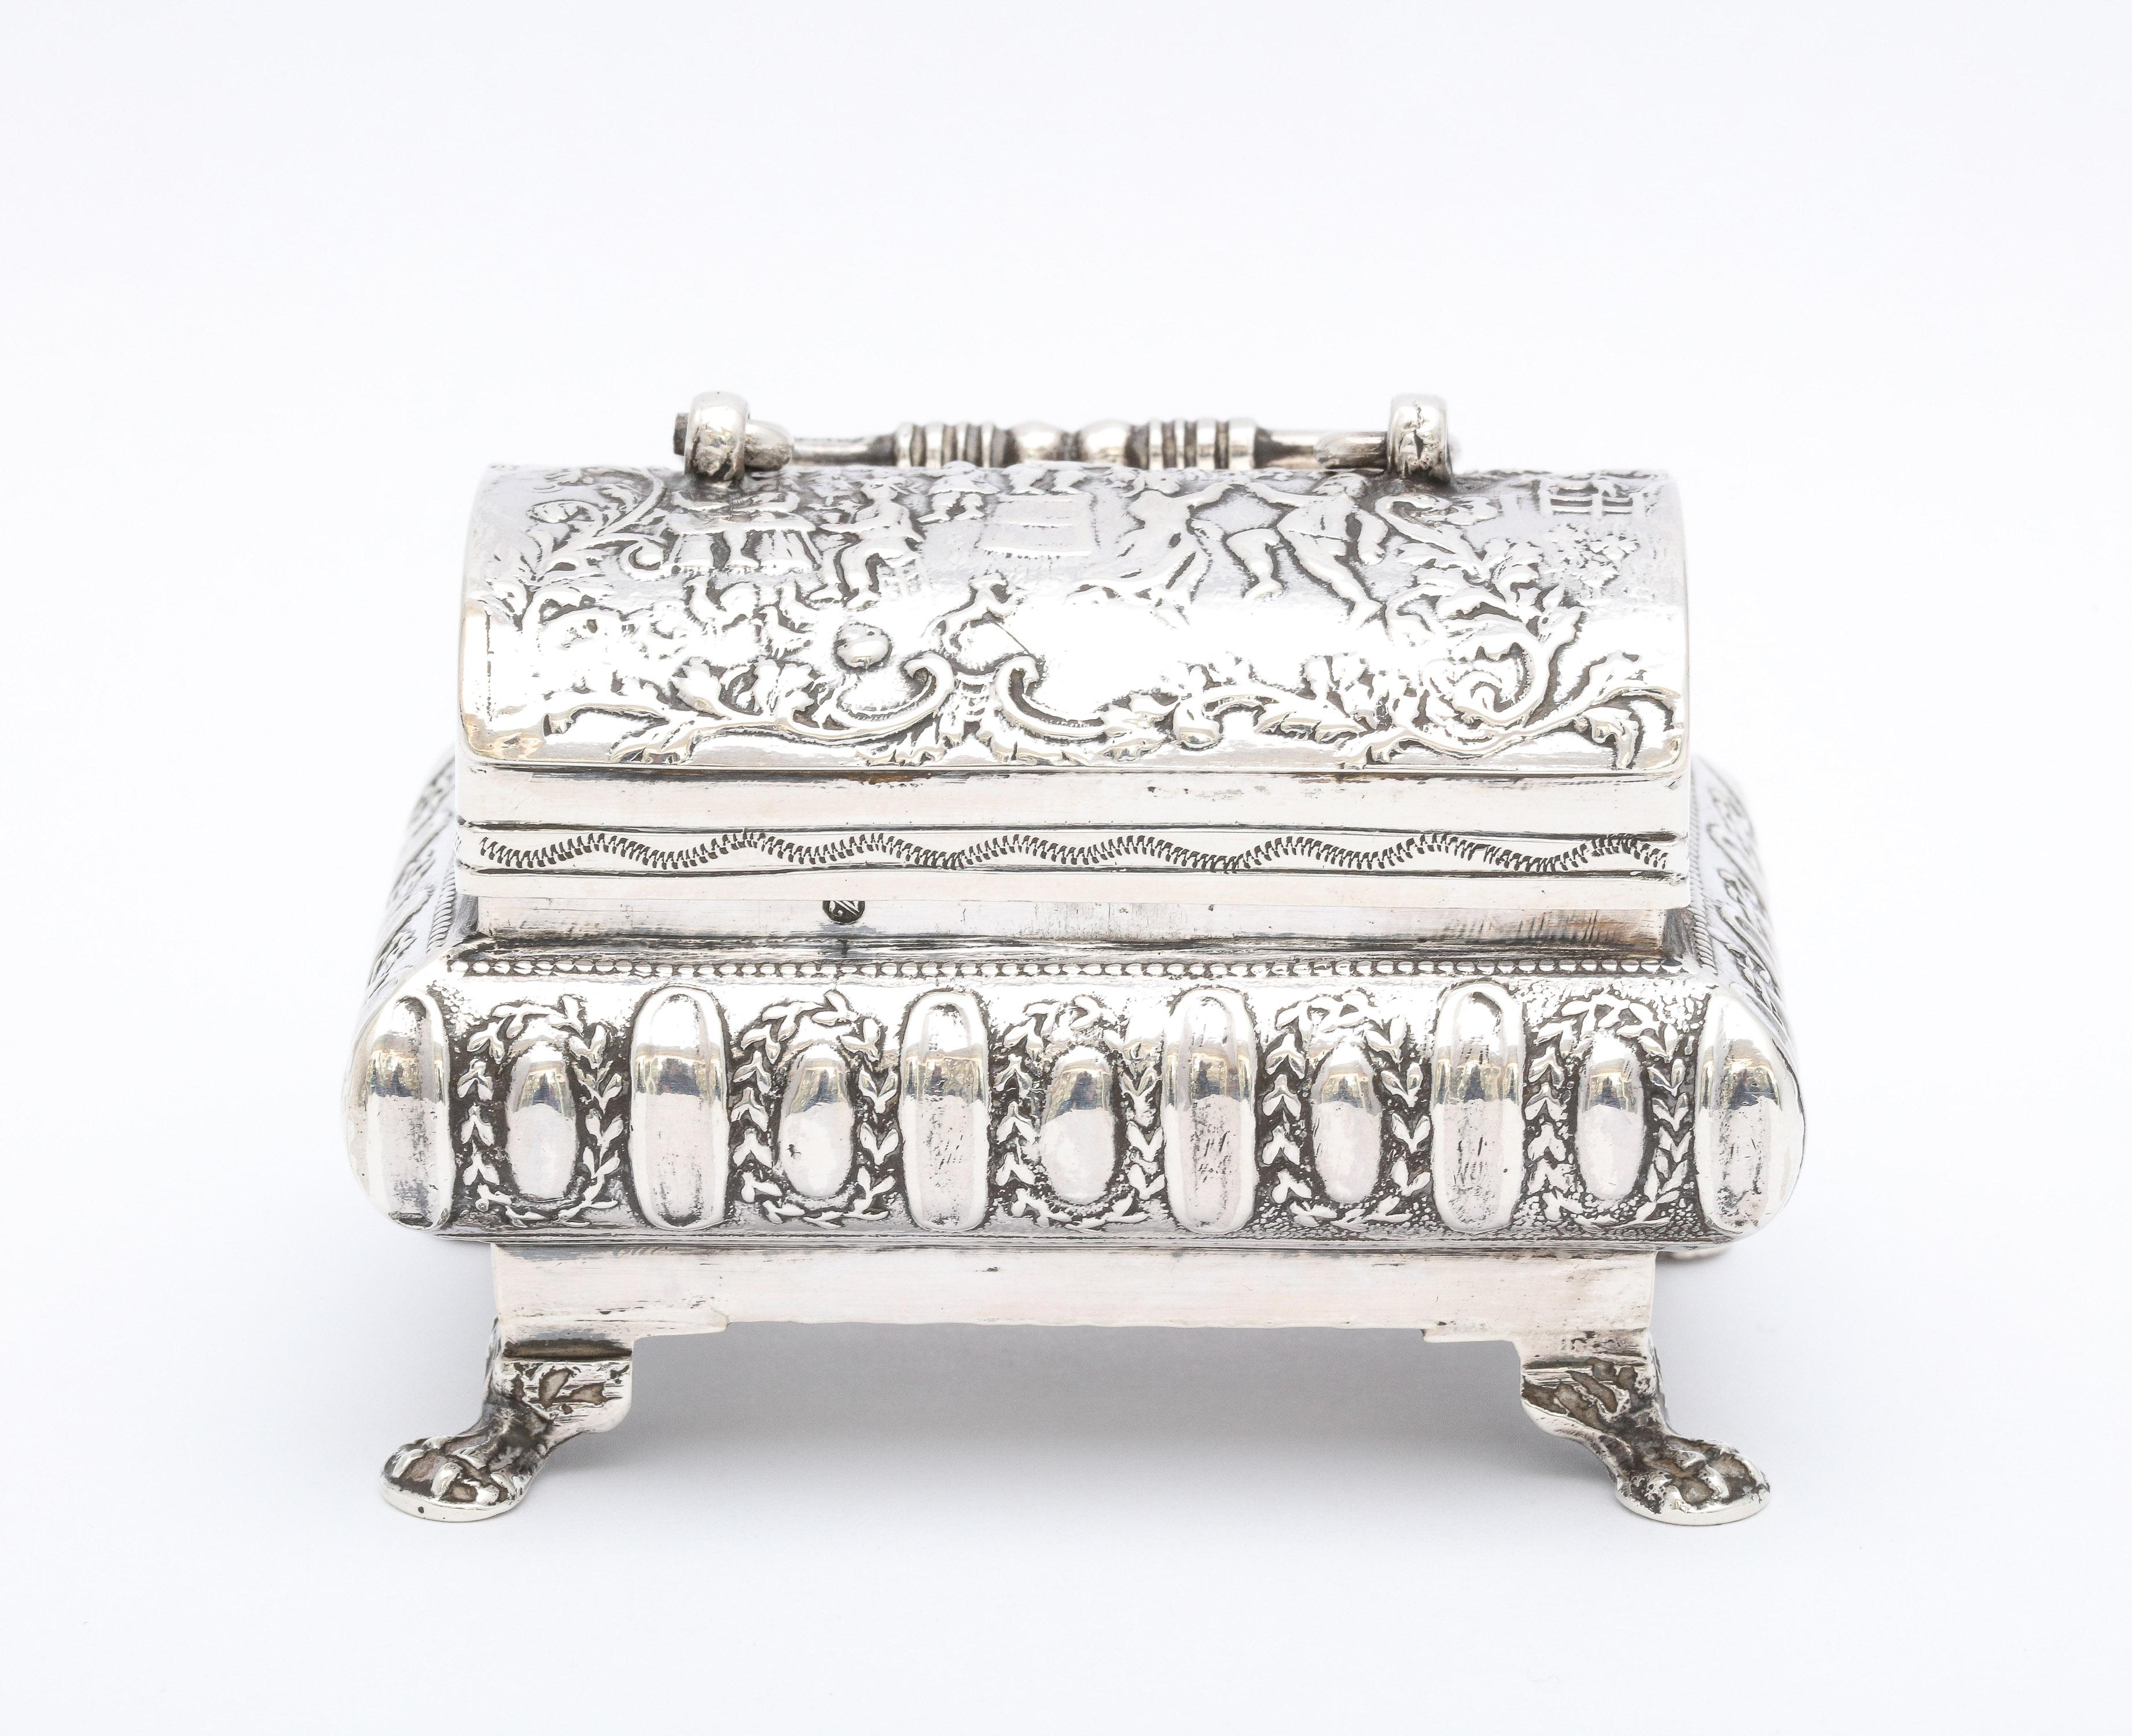 Rare, Edwardian Period, Renaissance-Style, sterling silver paw-footed trinkets box  with handle and hinged lid, made in Hanau, Germany and imported into Scotland, year-hallmarked for 1909, Berthold Miller Neresheimer - maker. Lovely scenic designs